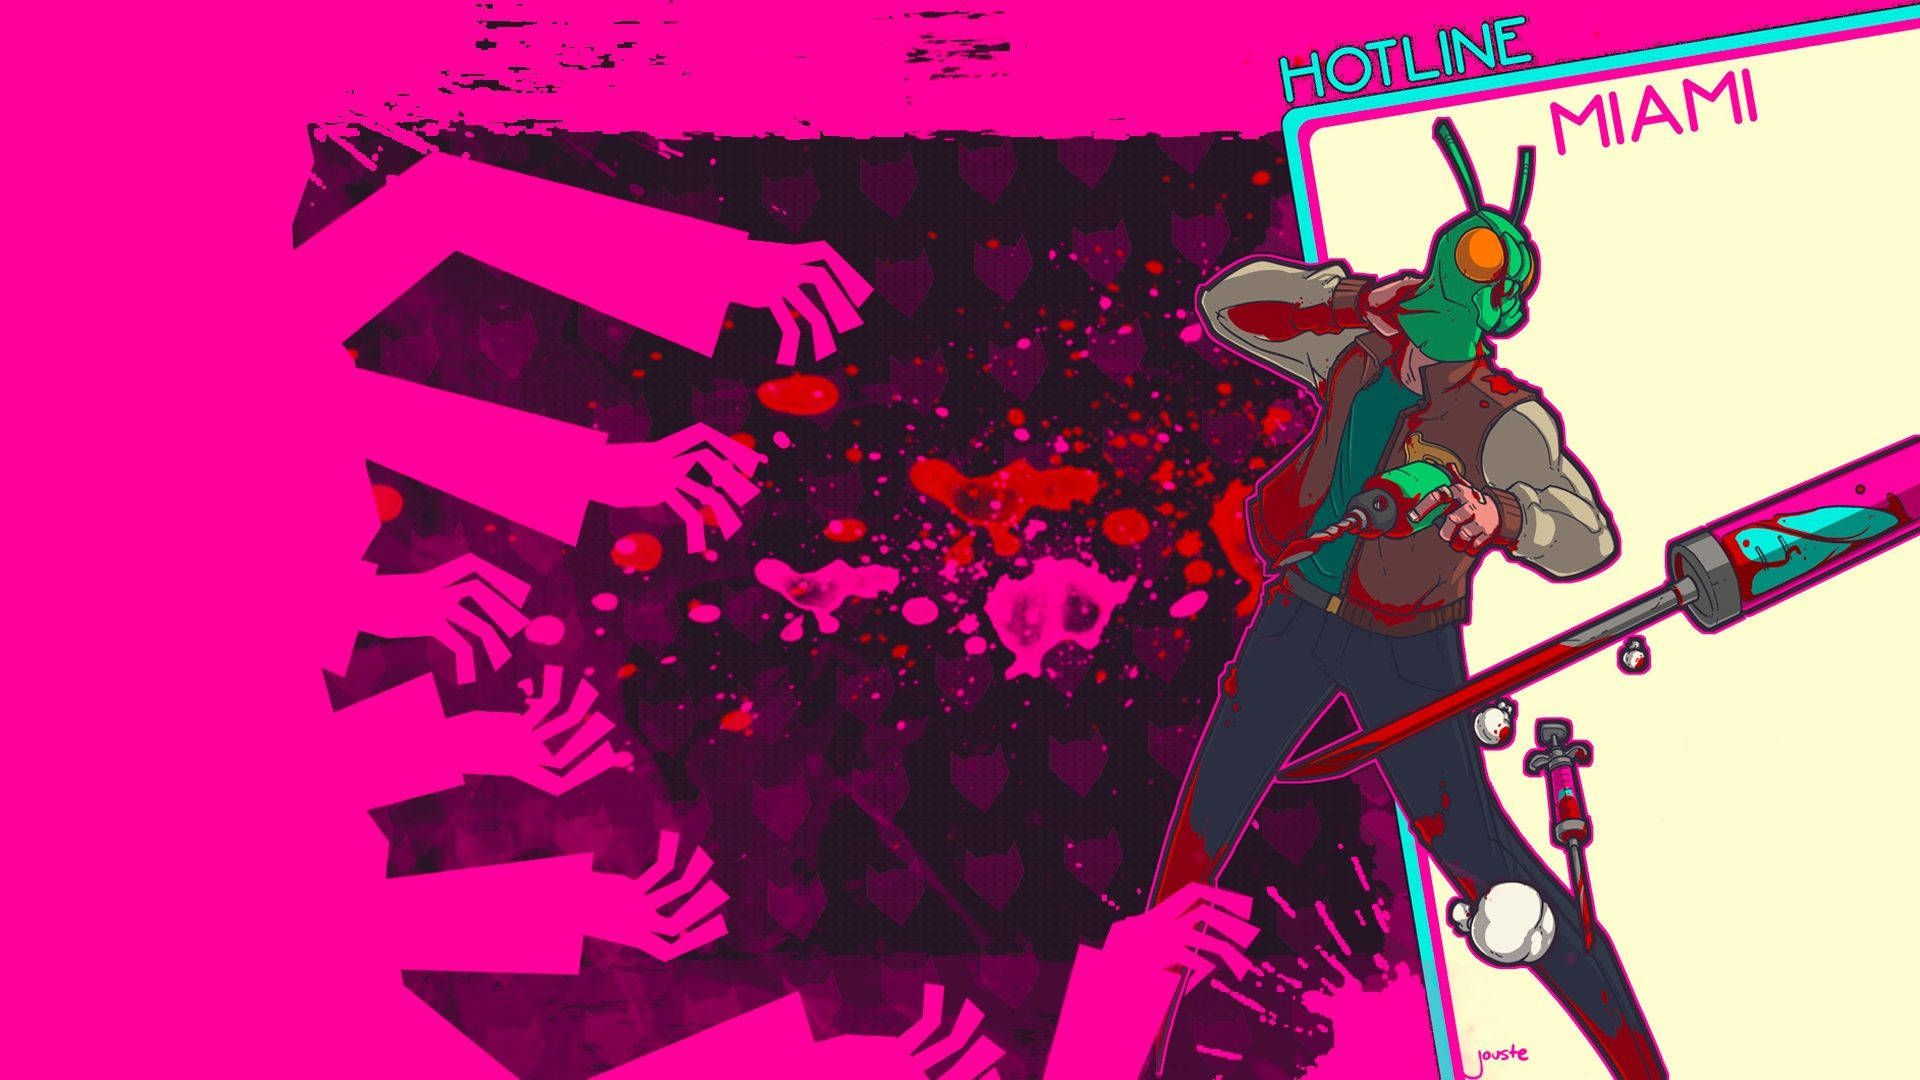 "Carl Face Mask from Hotline Miami" Wallpaper